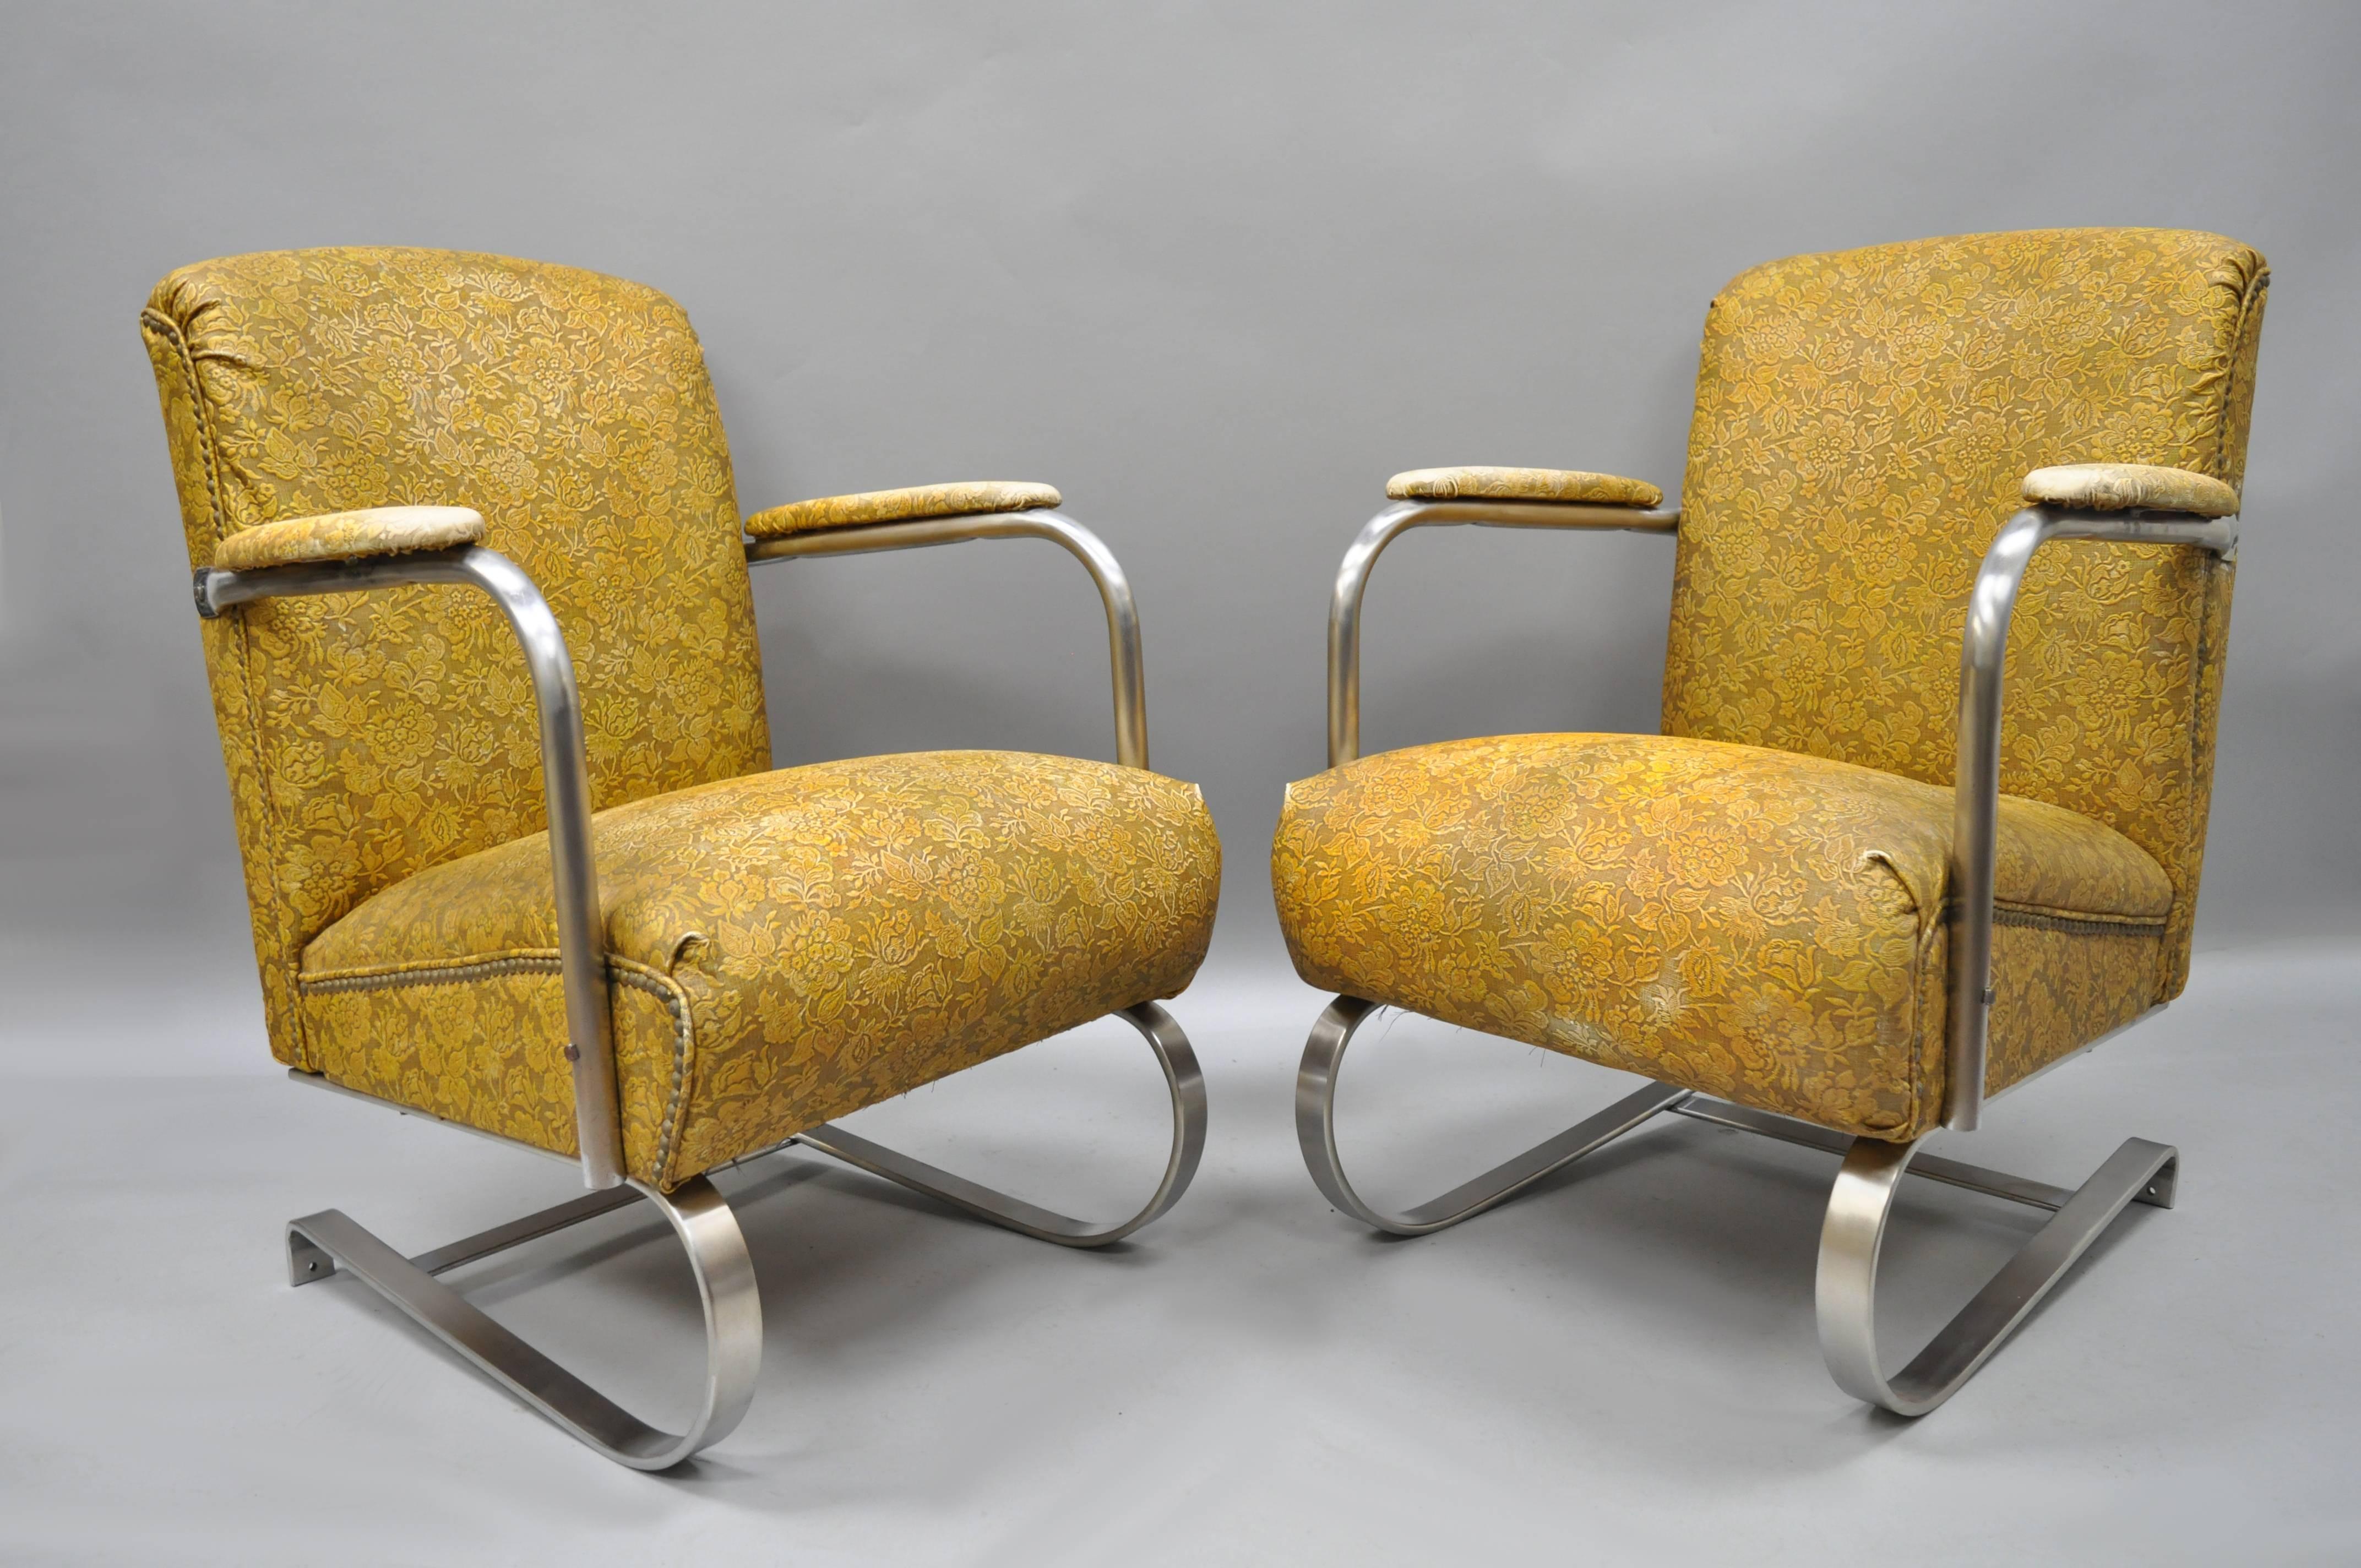 Vintage Art Deco / Machine Age Lloyd Springer chrome tubular and steel armchairs with rare upholstered frames, in the style of KEM Weber. Chairs feature heavy metal frames, fully upholstered in the original yellow floral vinyl, upholstered armrests,